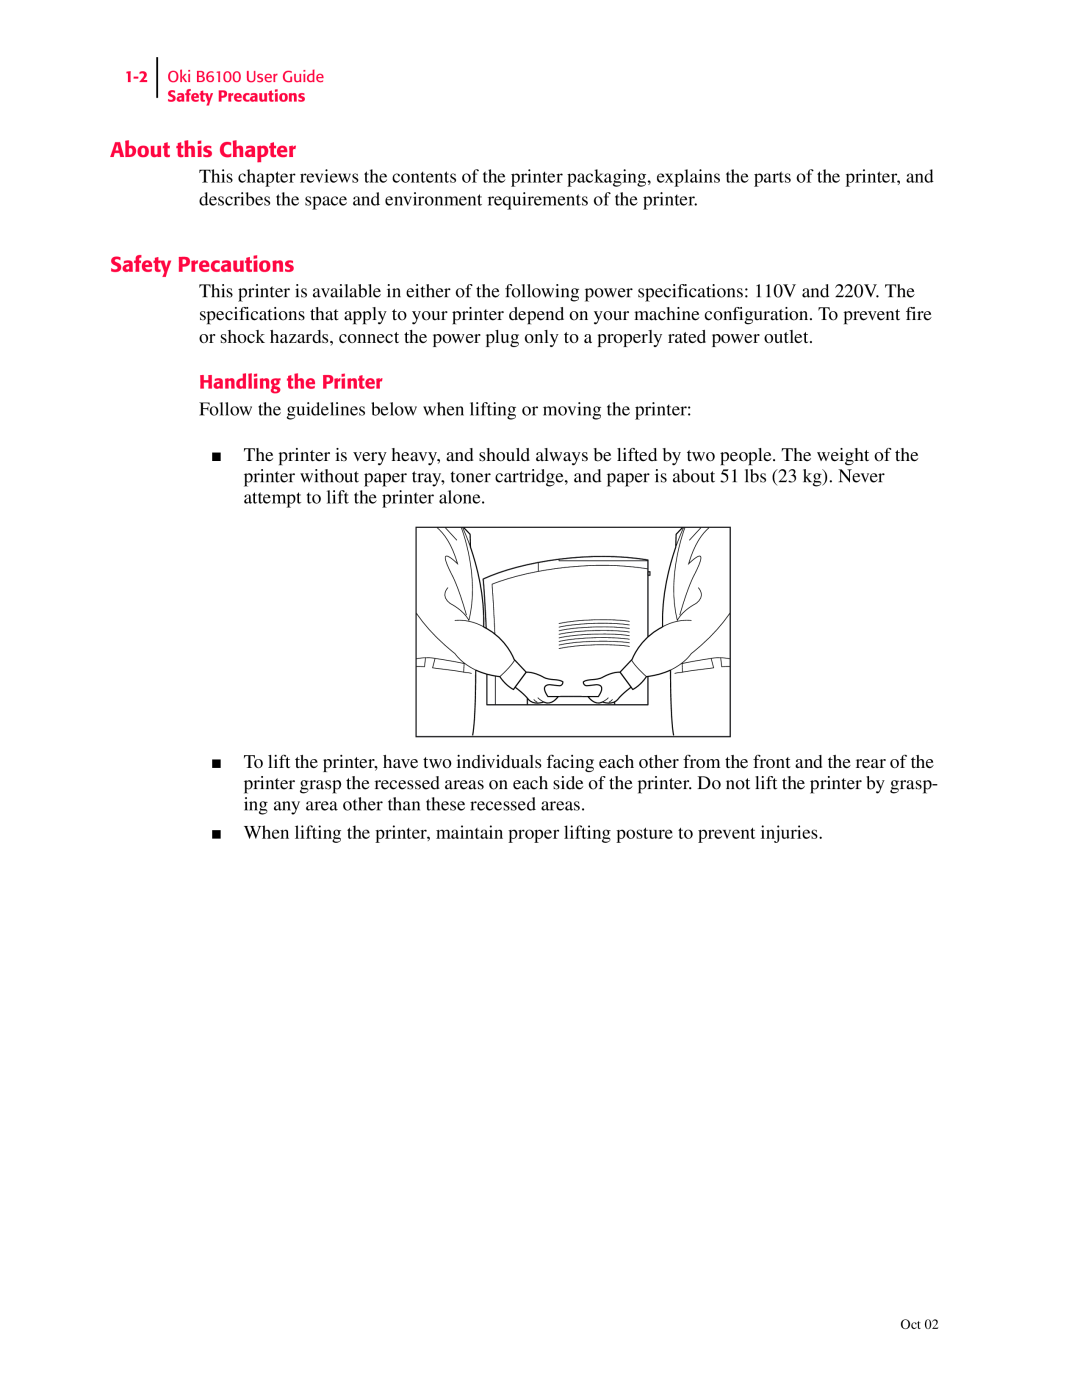 Oki 6100 manual About this Chapter, Safety Precautions, Handling the Printer 